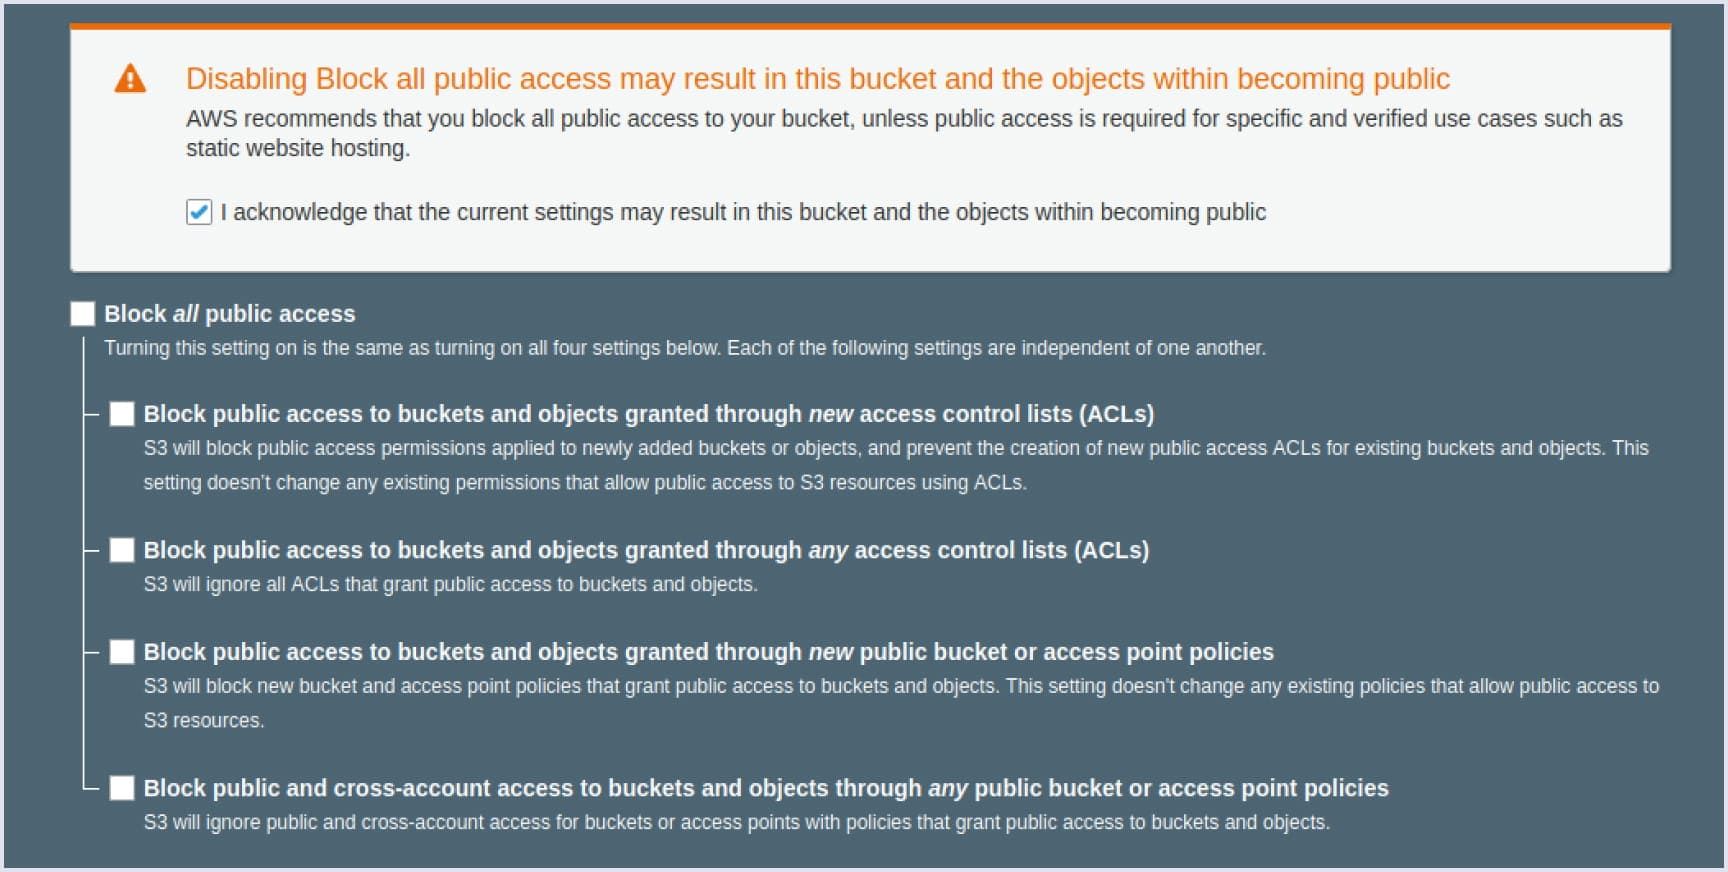 Provide public access to your bucket